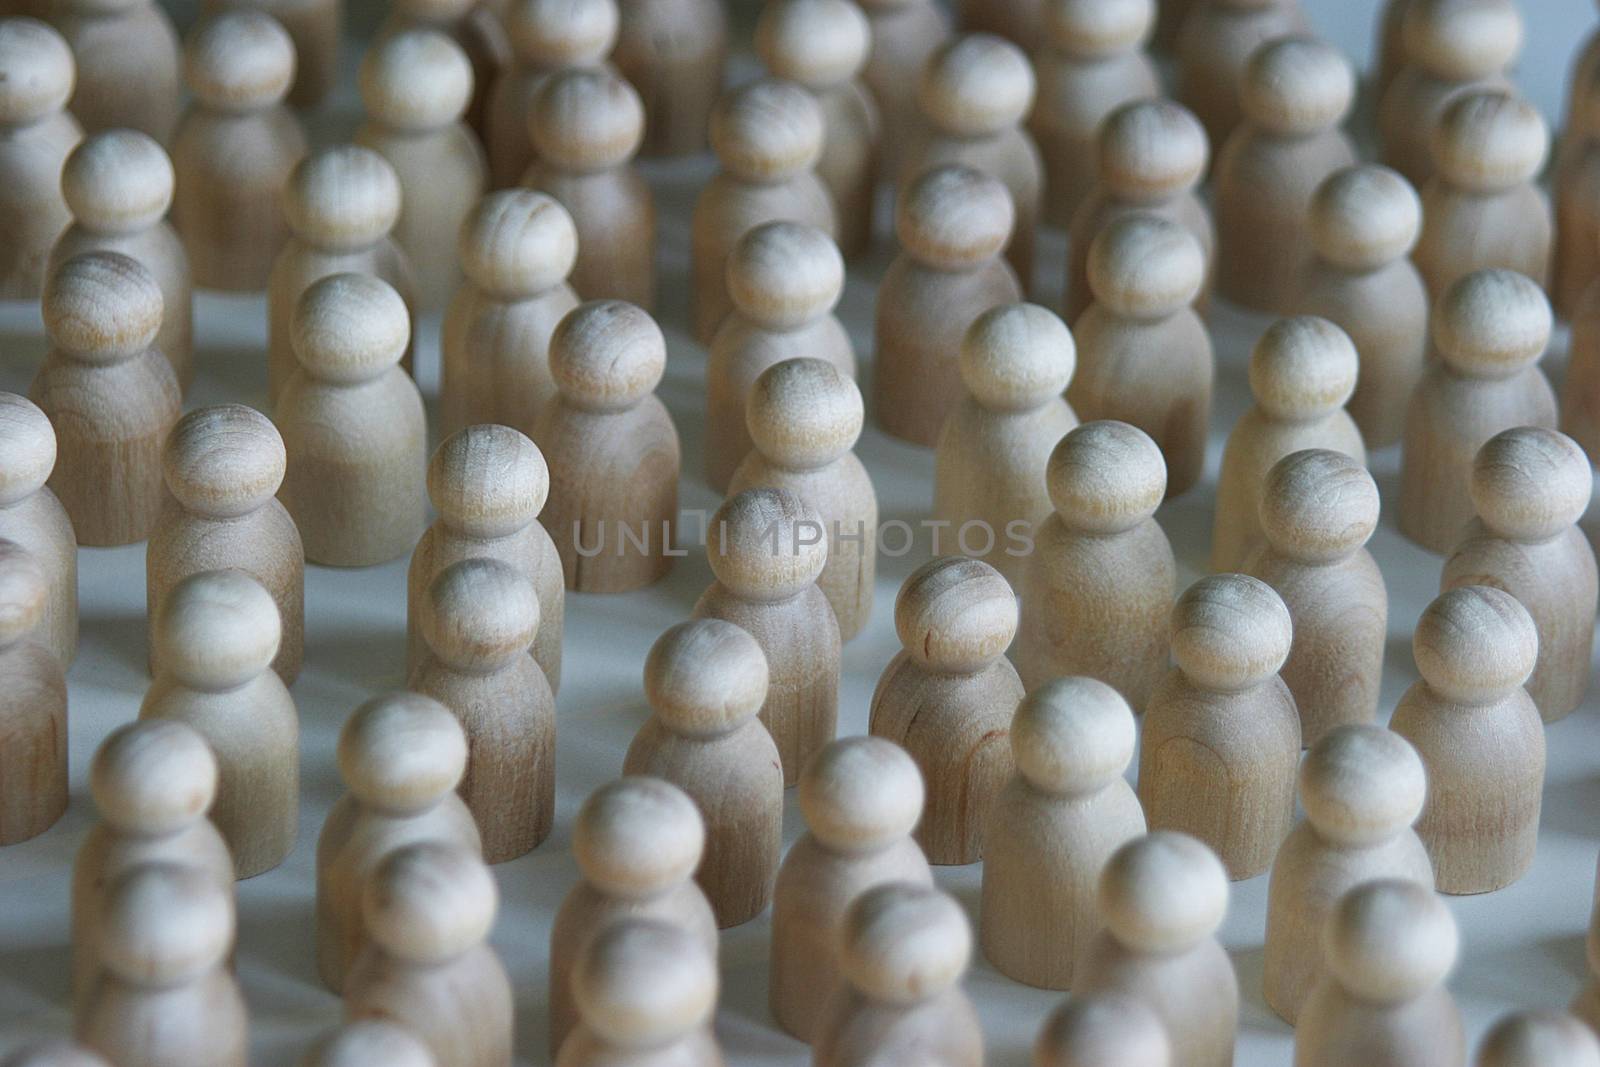 A group of wooden turned part people gathered together